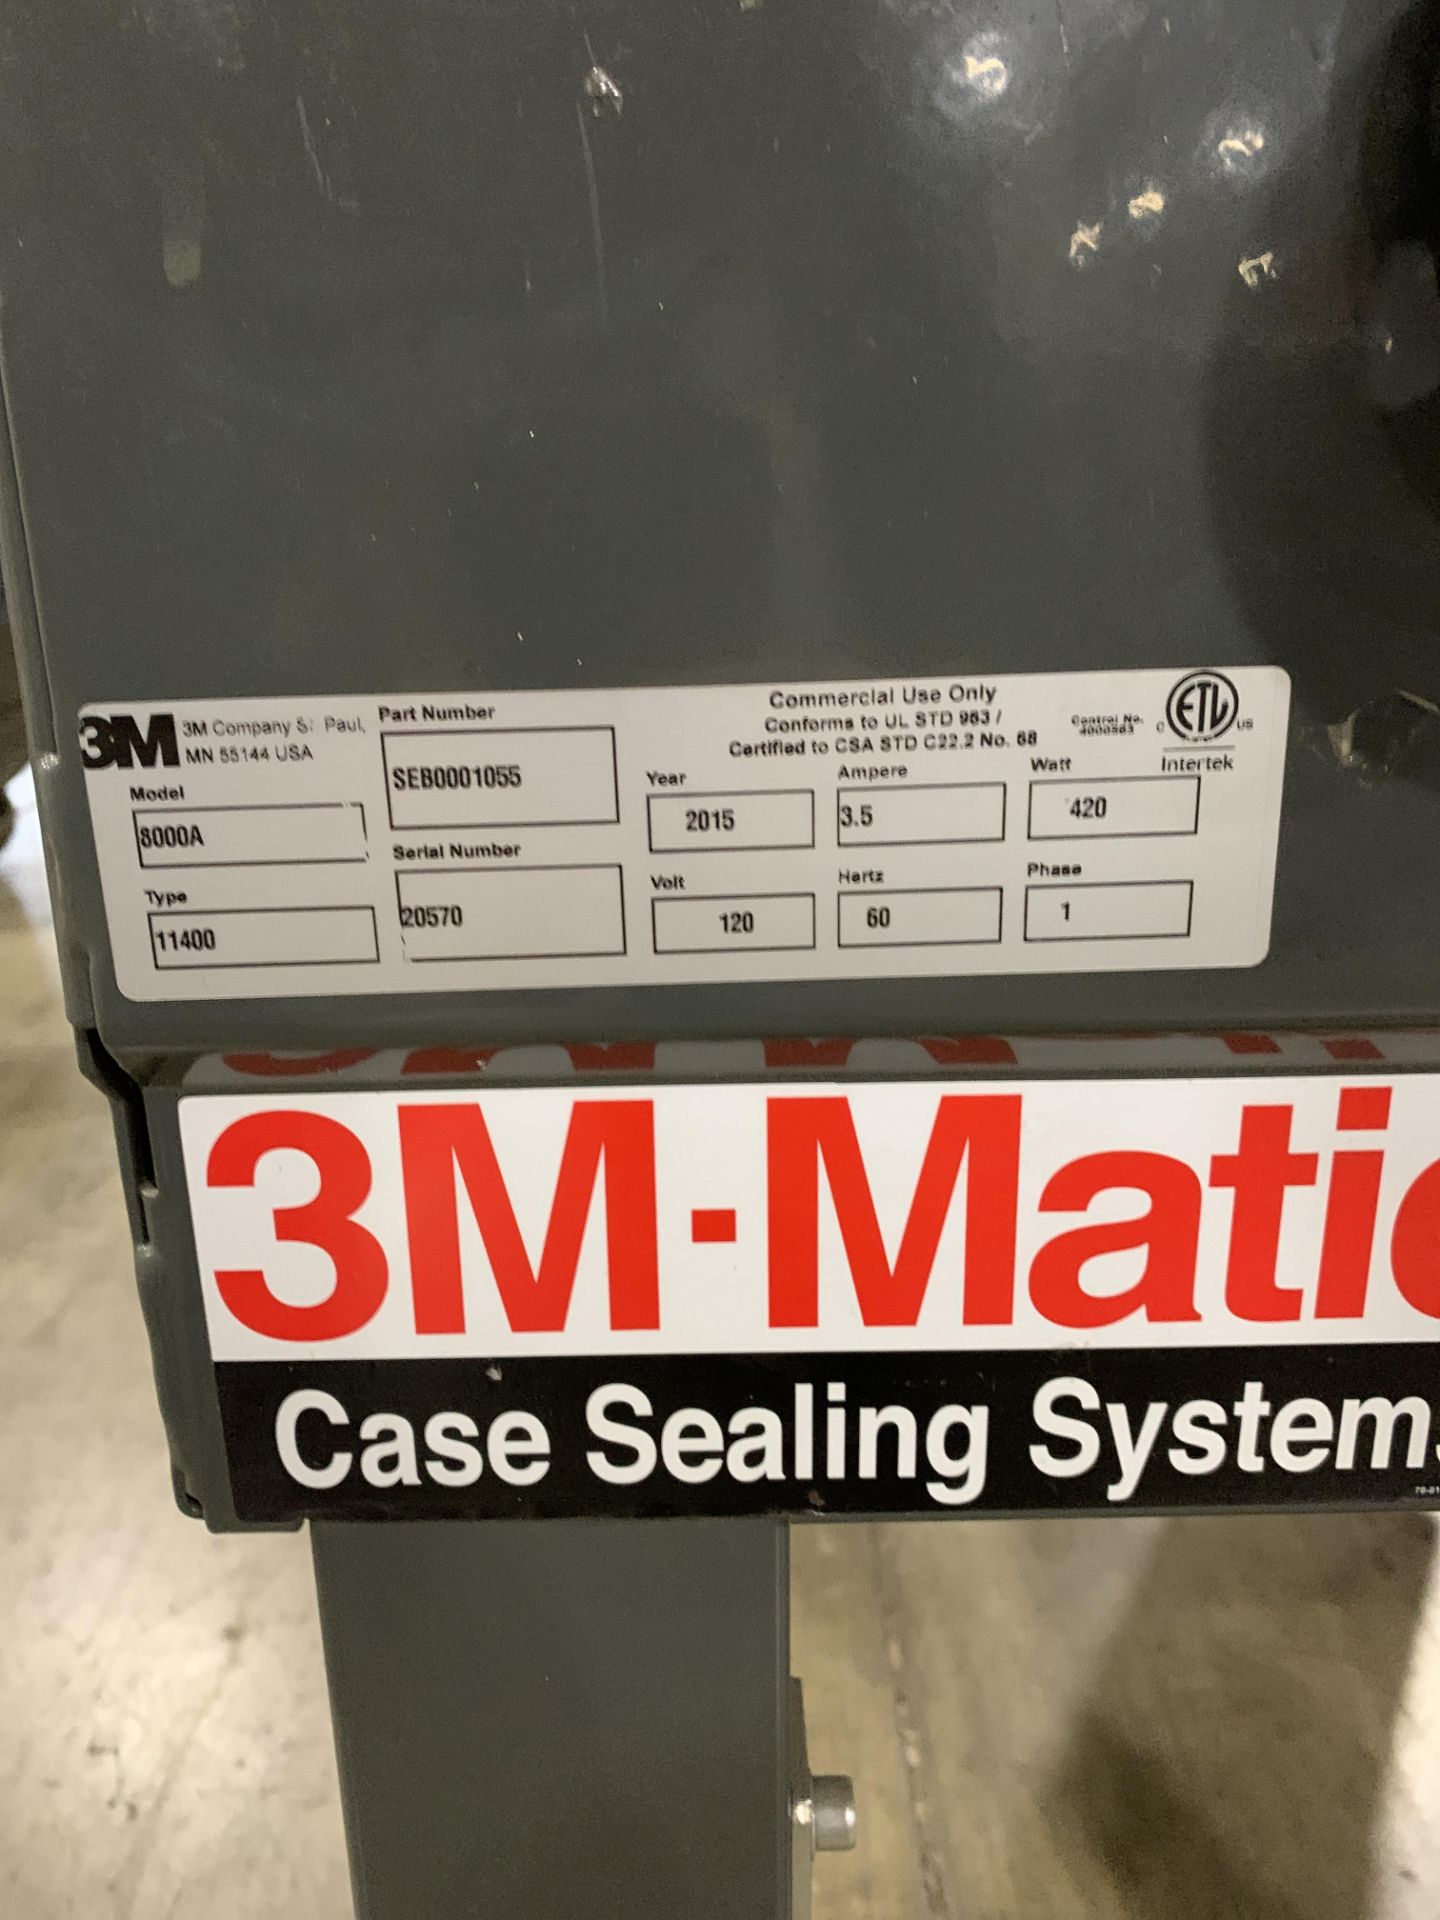 3M-MATIC CASE SEALING SYSTEM (NEEDS REPAIRS): MODEL 800A SERIAL 20570 (120V 60HZ 1 PH) - Image 2 of 3